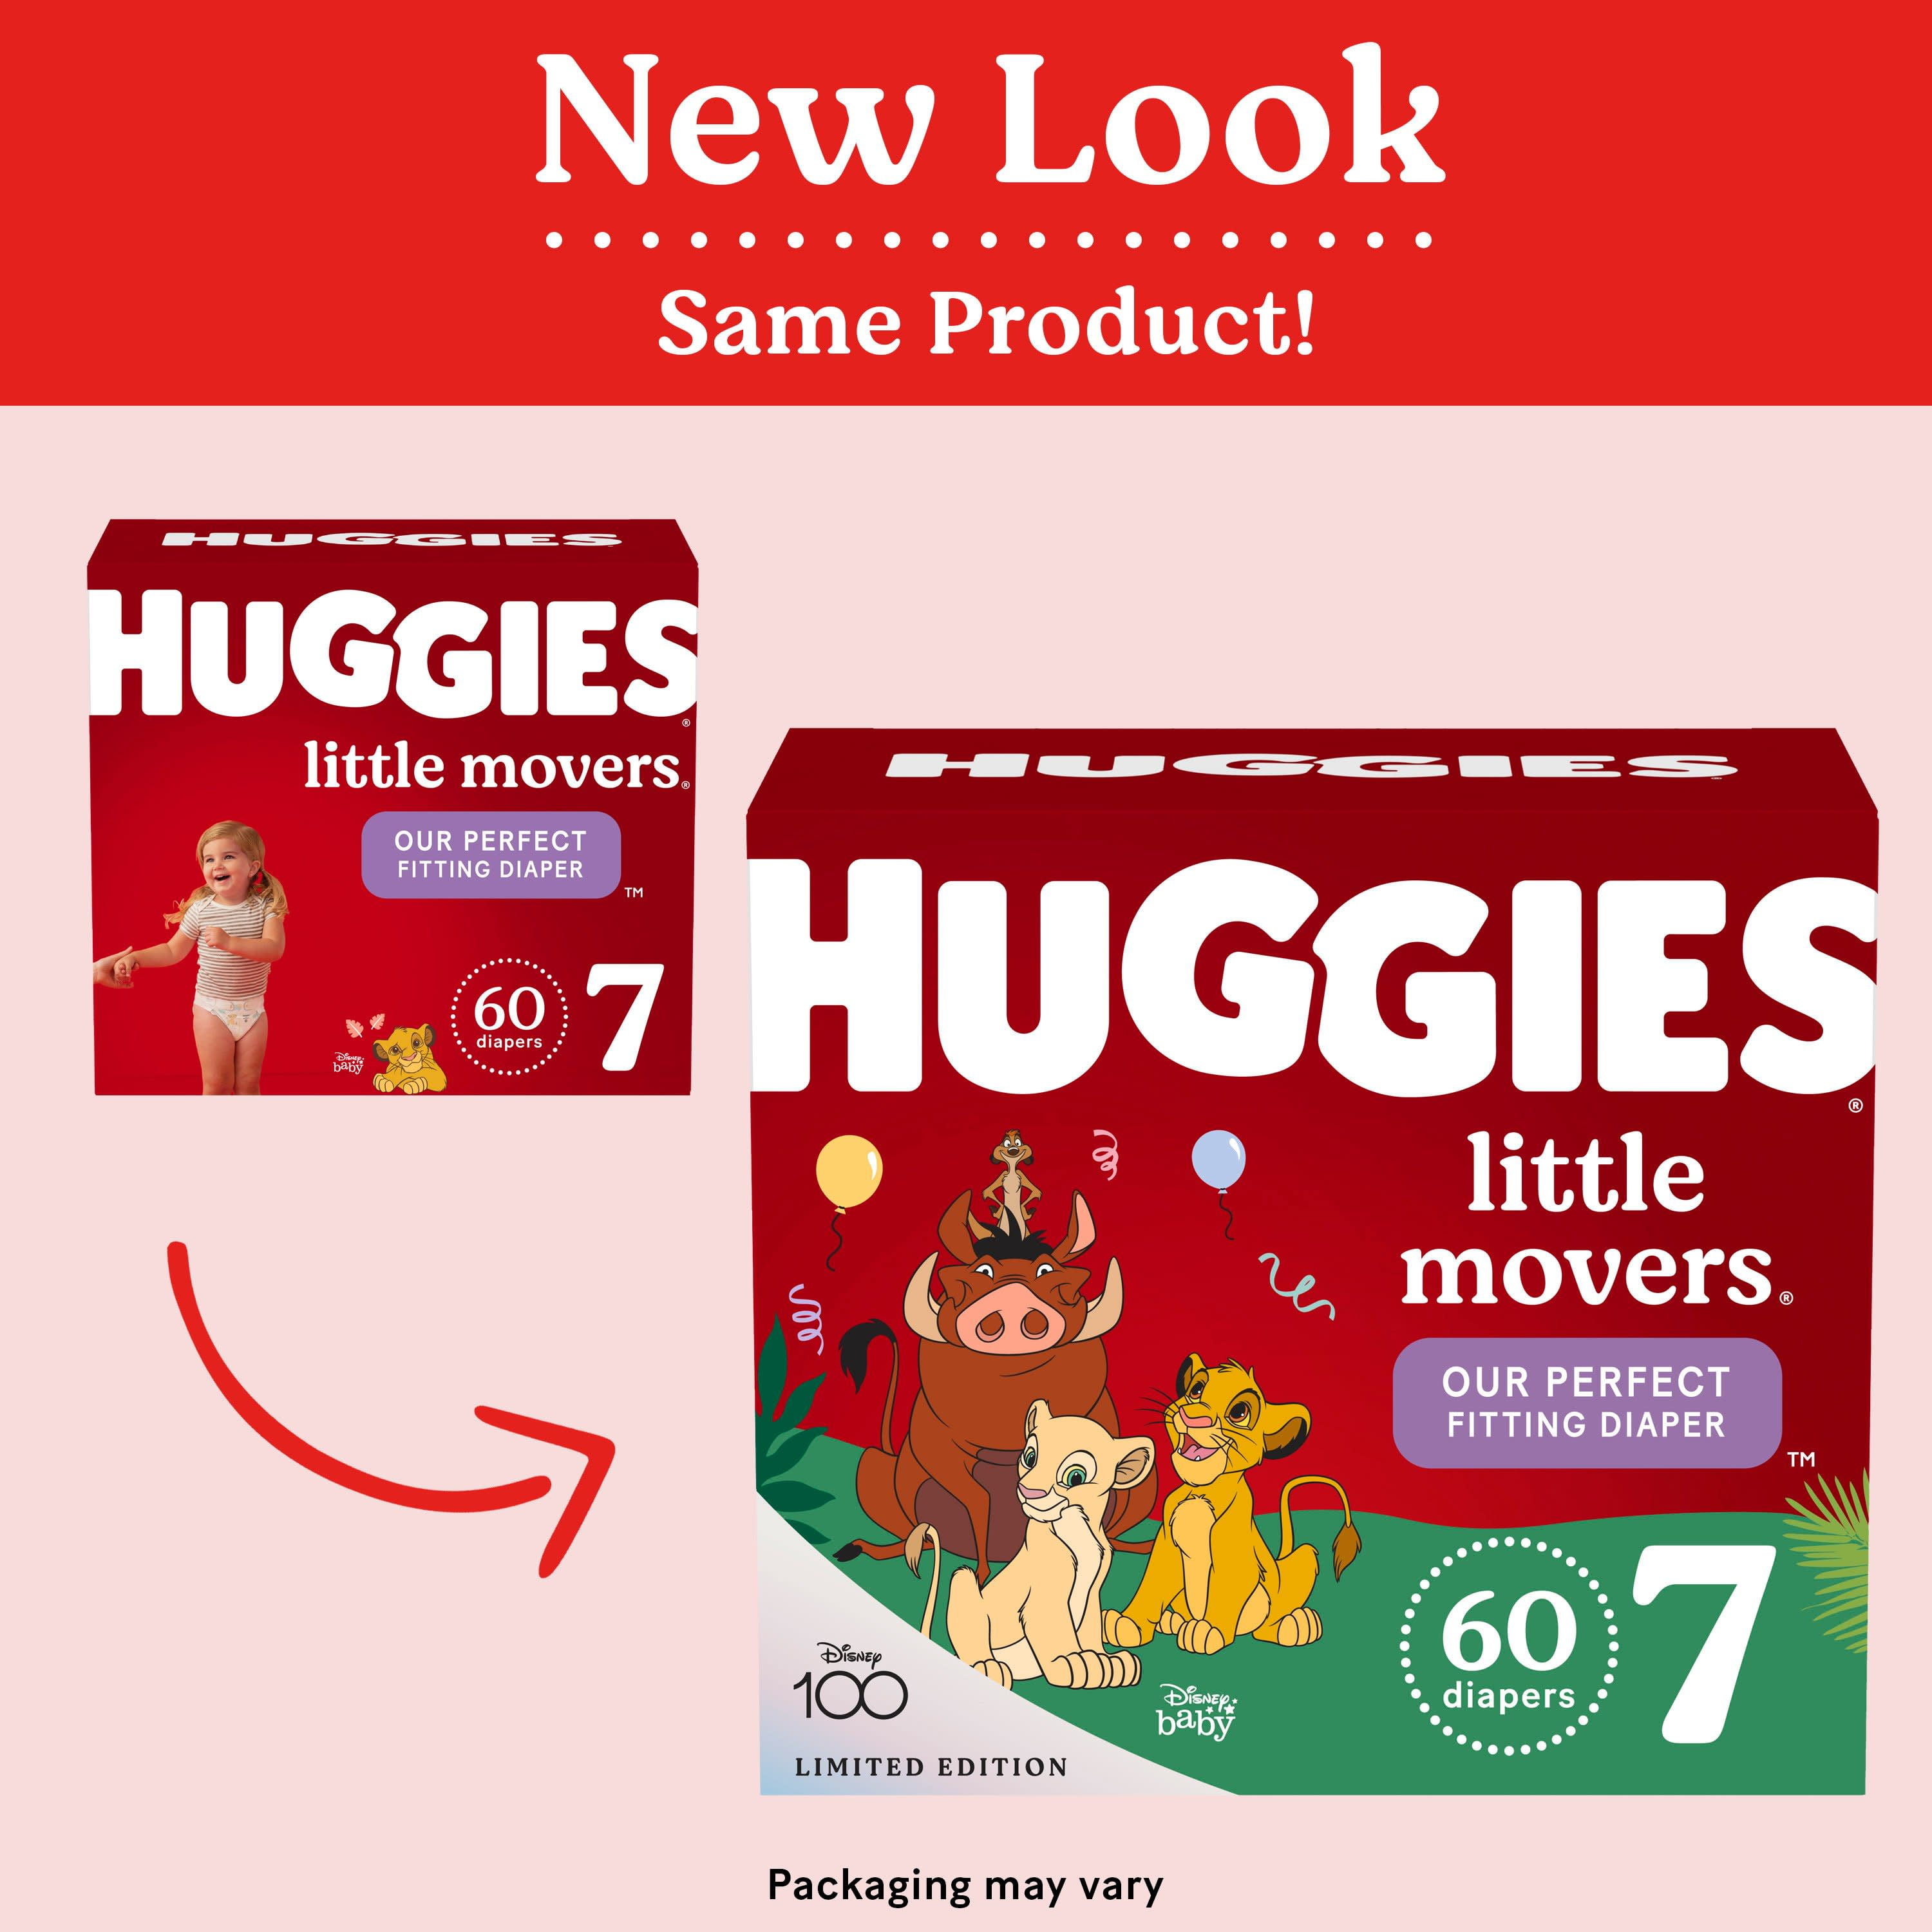 Huggies Size 7 Diapers, Little Movers Baby Diapers, Size 7 (41+ lbs), 80  Count